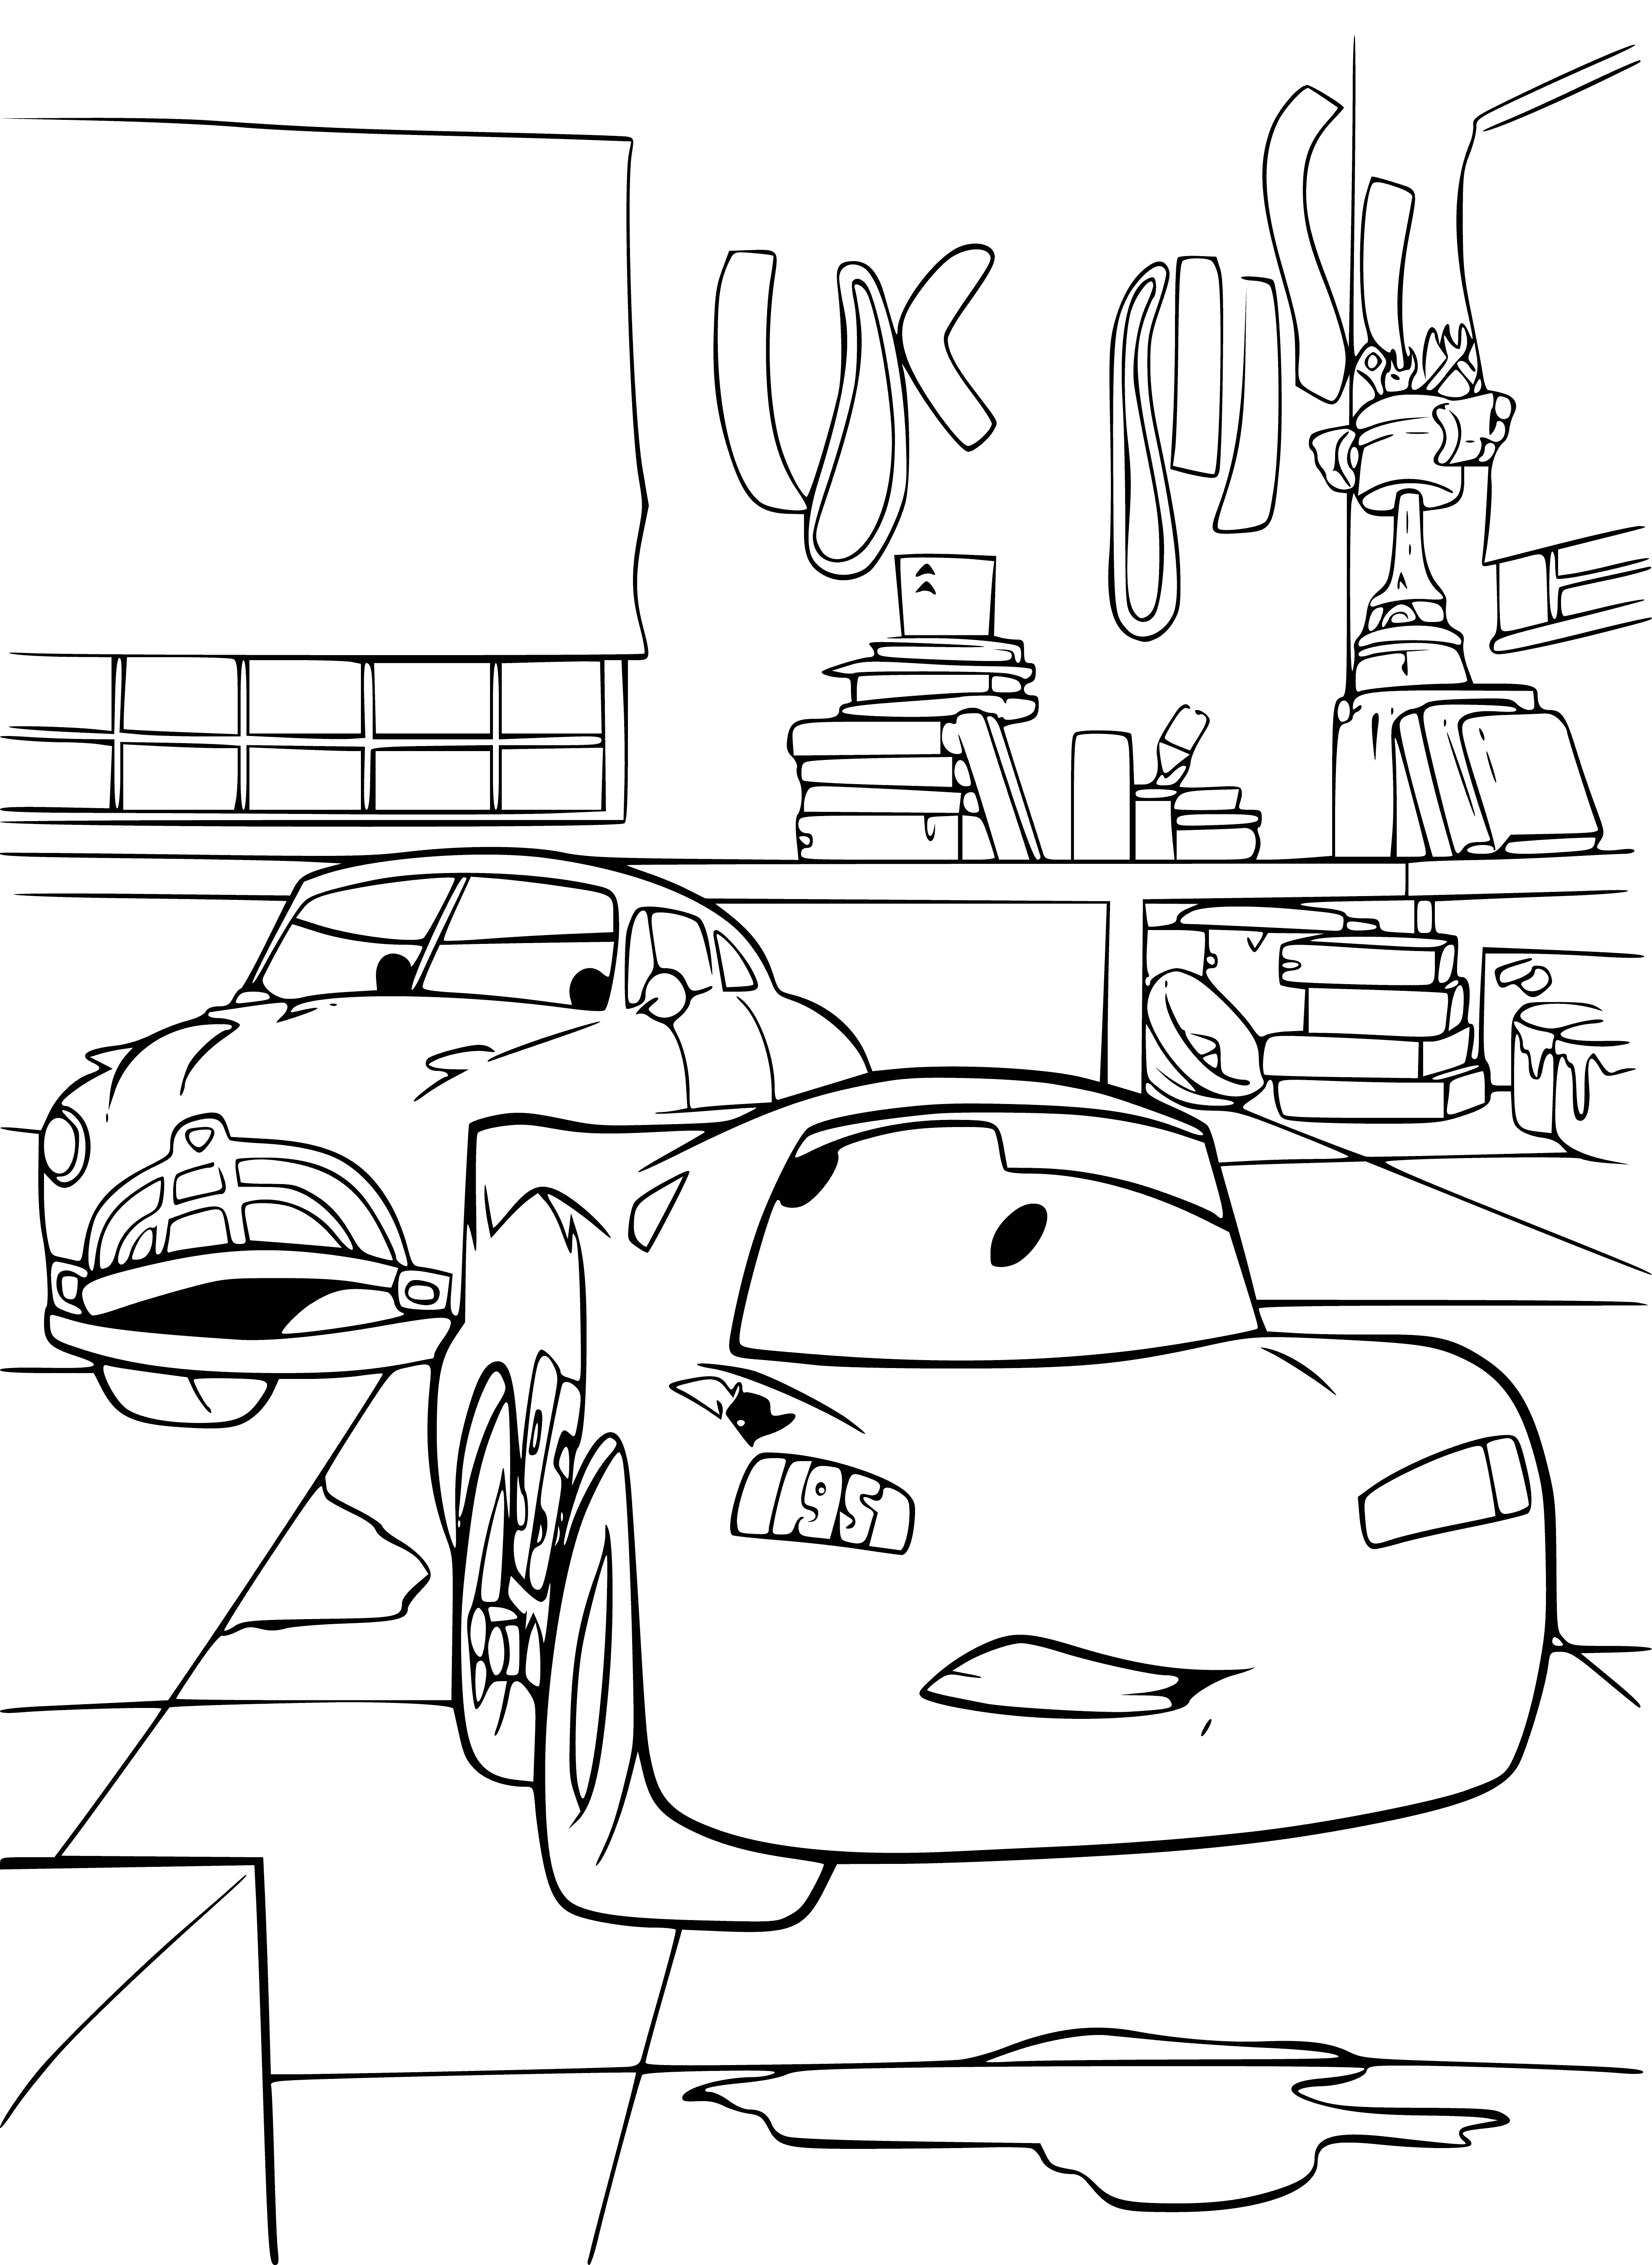 Doc Hudson and Lightning McQueen coloring page